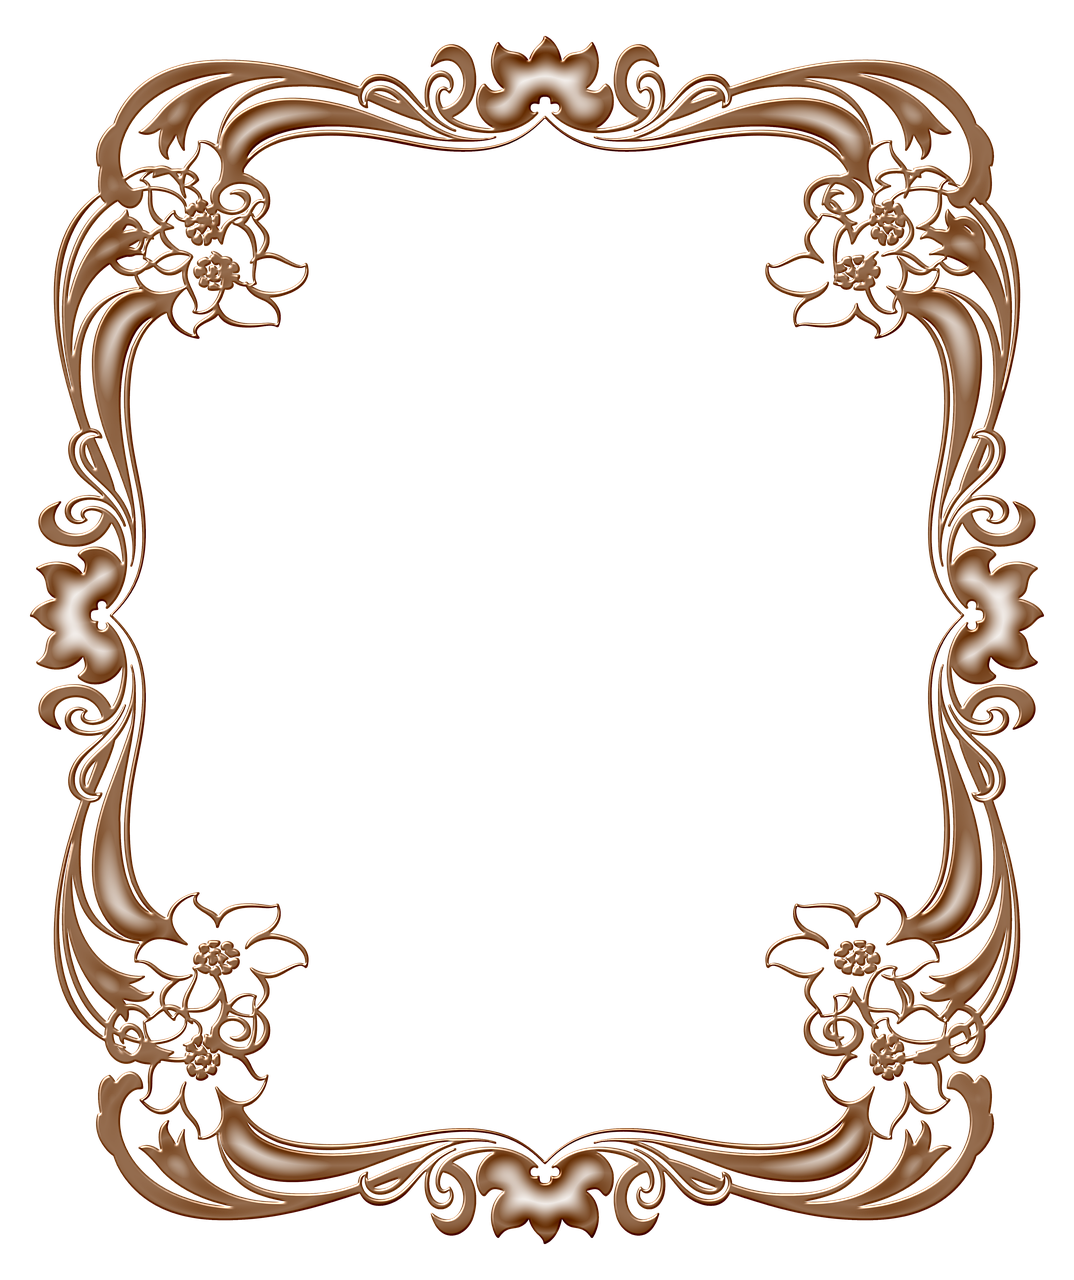 a brown ornate frame on a black background, a digital rendering, zbrush central, art nouveau, 1128x191 resolution, beautiful bone structure, reflections in copper, professional woodcarving